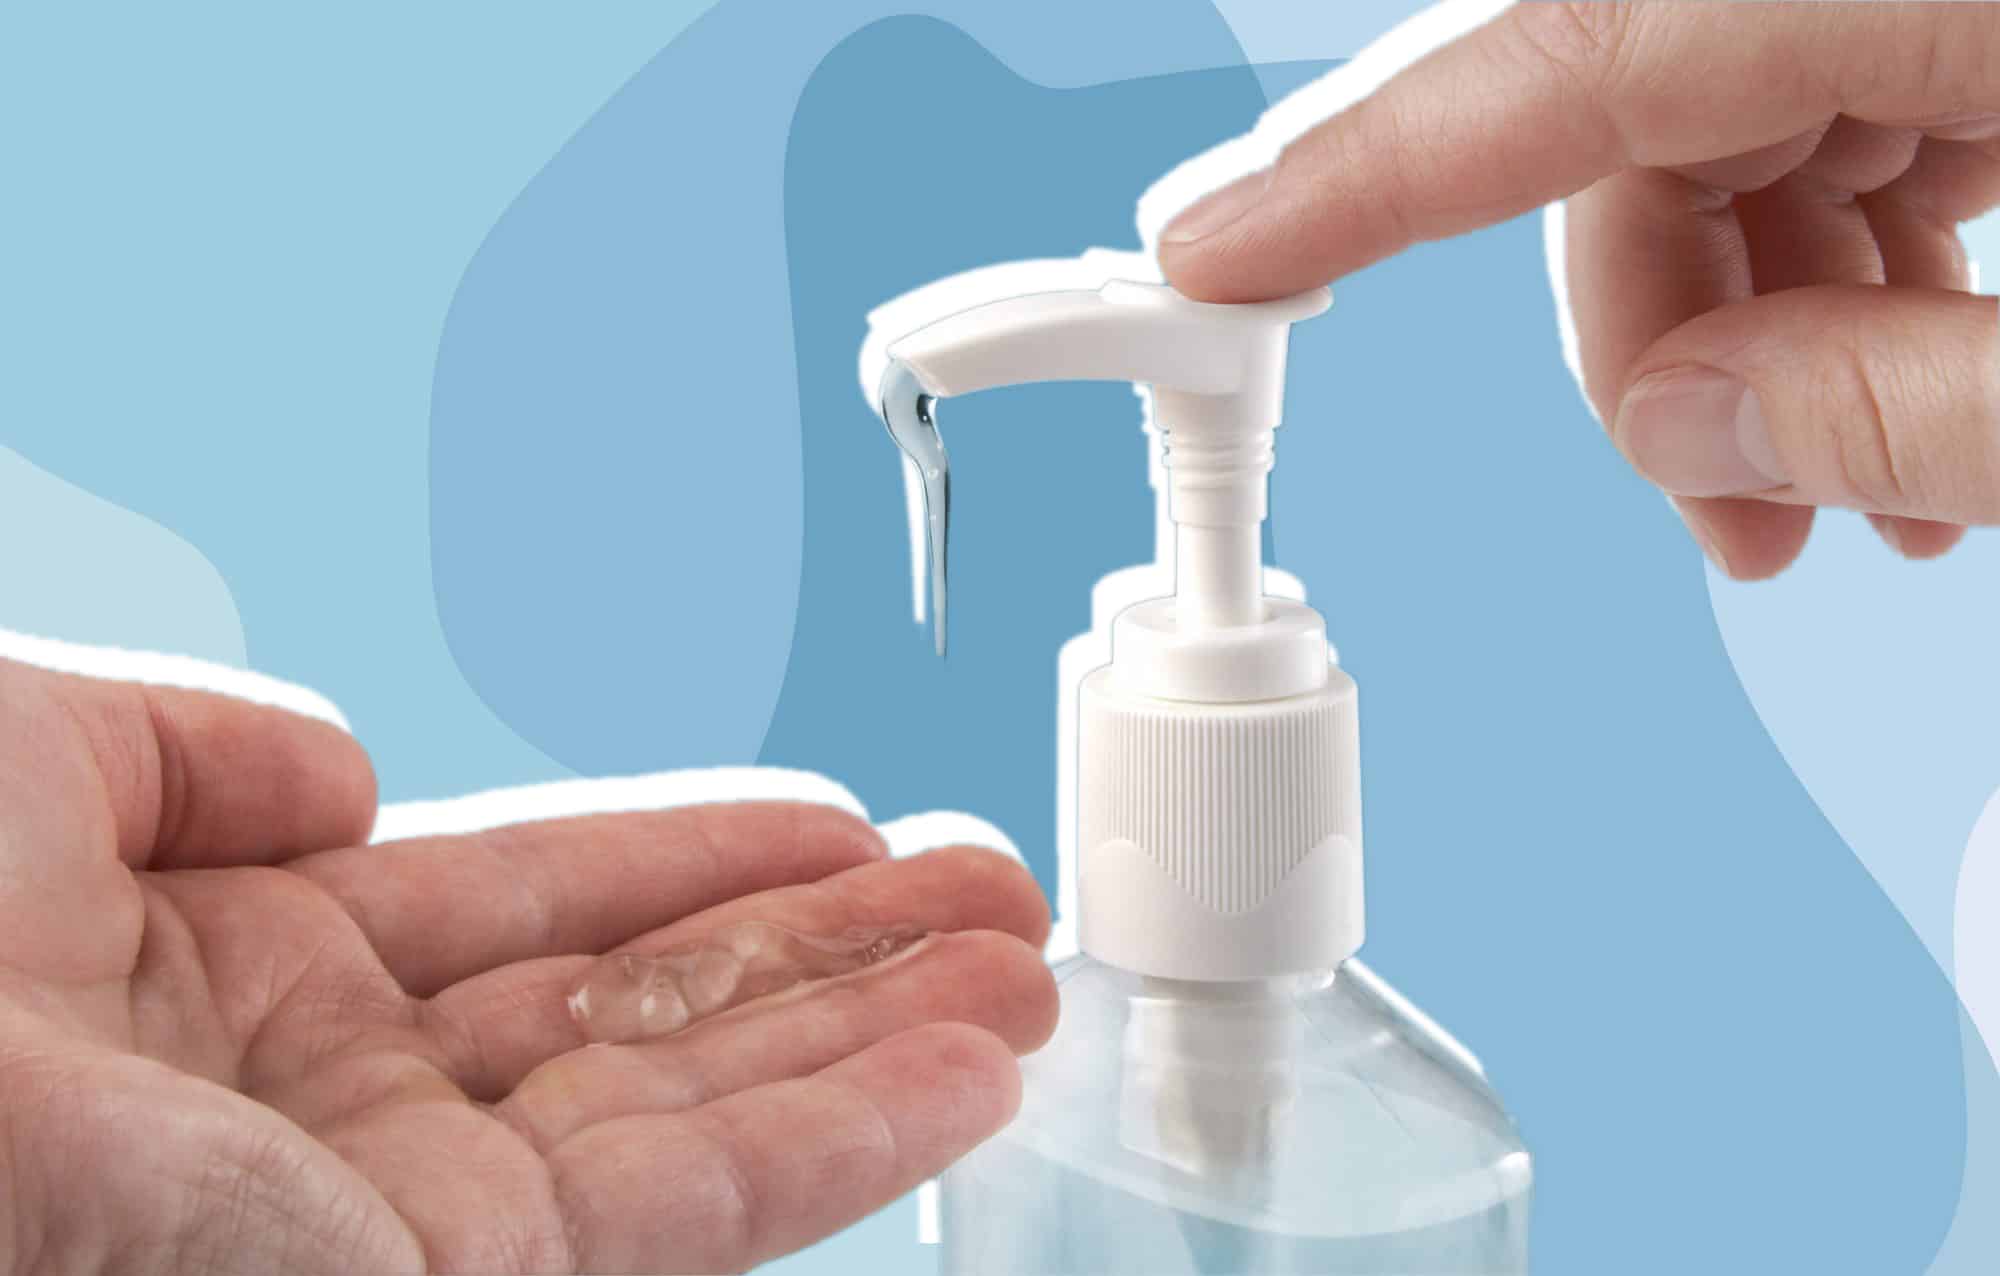 Common Myths and Facts About Hand Sanitizers